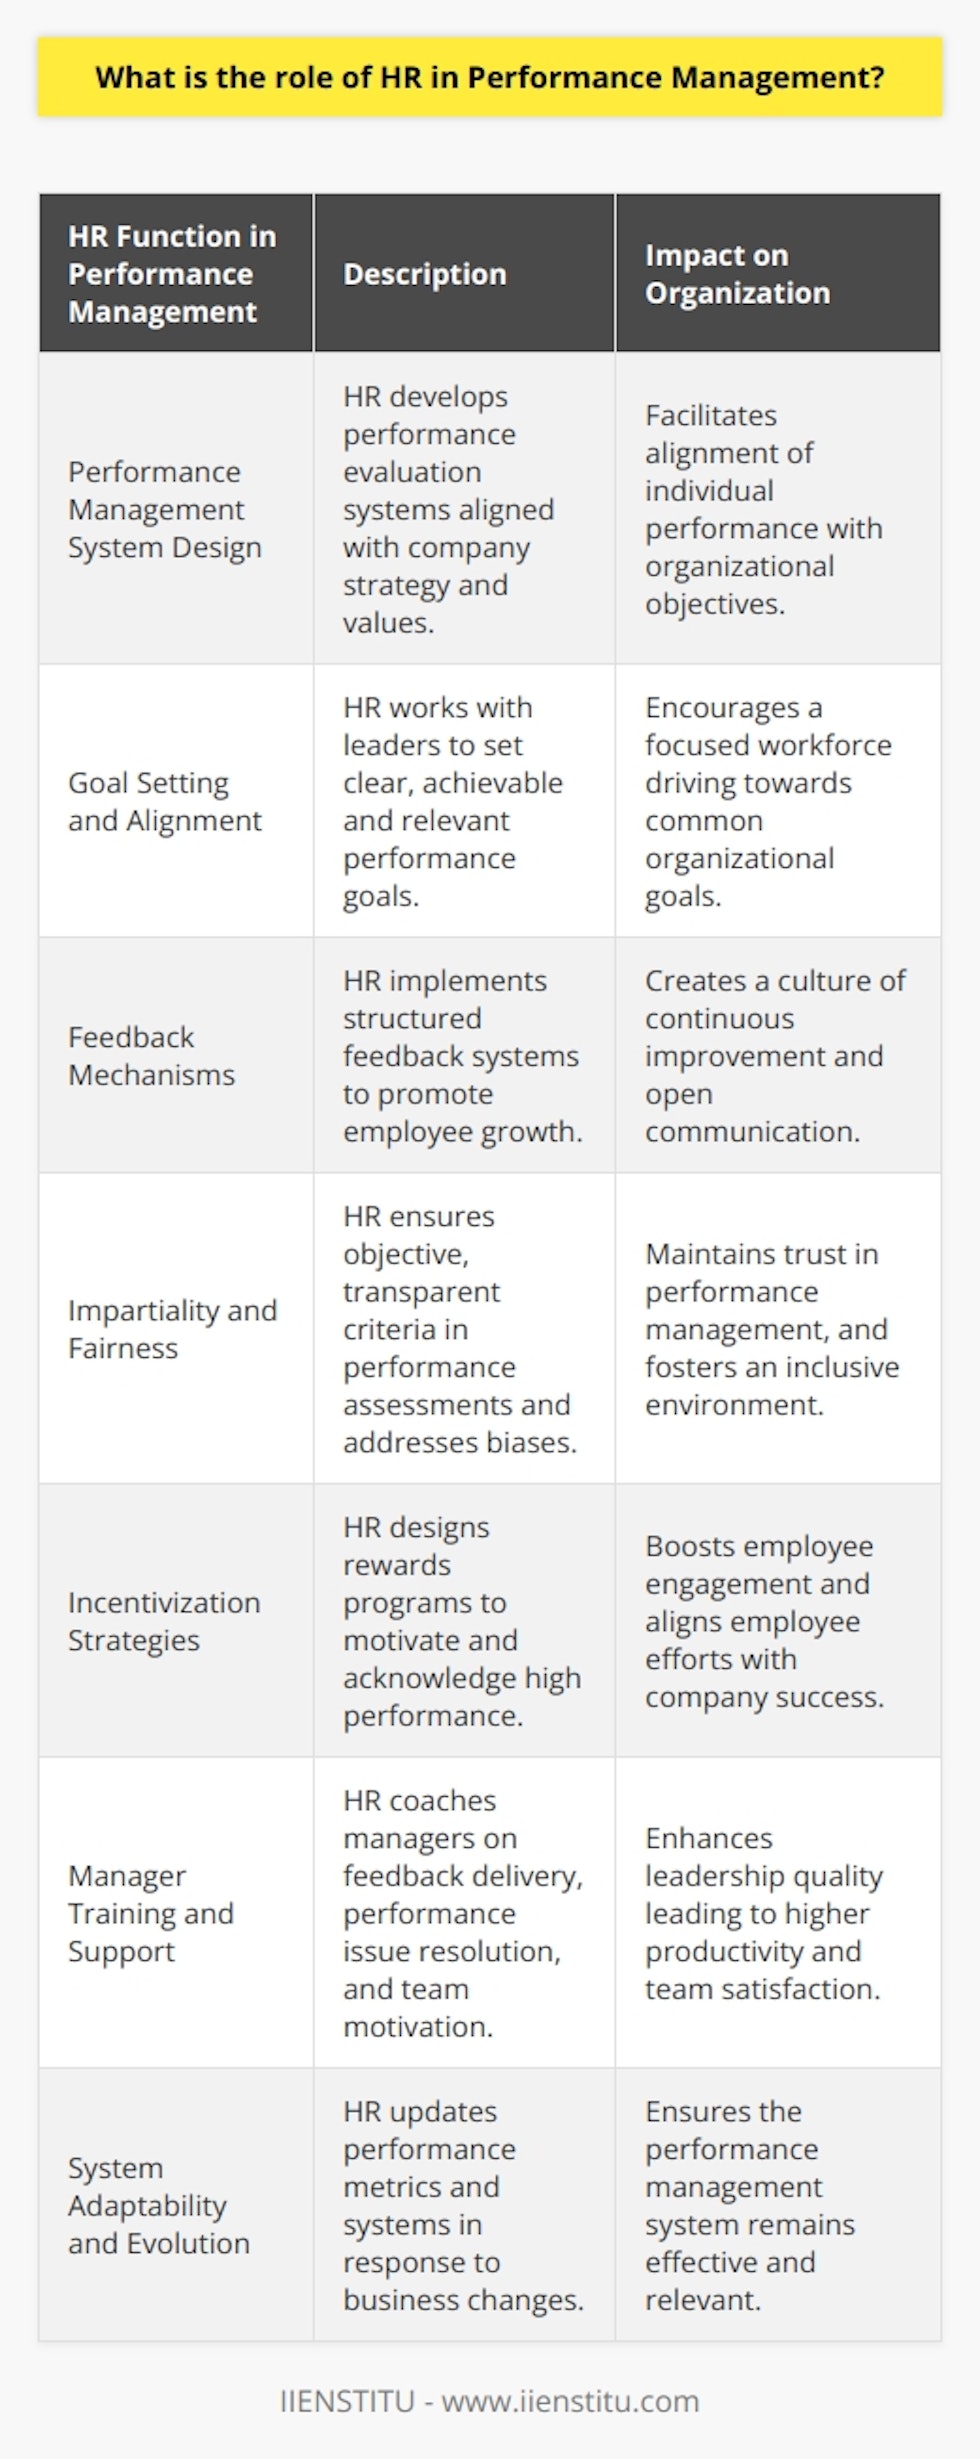 The role of HR in performance management is multifaceted and vital for the sustained success and growth of an organization. One of their primary responsibilities is the design and administration of performance management systems that align with the strategic objectives of the business. HR professionals craft the policies and procedures that guide the evaluation of employee performance, ensuring these frameworks support the overarching mission and values of the company.In the realm of goal setting, HR facilitates the creation of clear, attainable, and relevant objectives for employees, which often involves collaboration with department heads and managers. These goals serve not only as benchmarks for individual and team performance but also as drivers of organizational advancement. By enabling employees to understand how their work contributes to the larger picture, HR fosters a sense of involvement and purpose.Feedback mechanisms are another critical area where HR has a substantial impact. Human Resources ensures that feedback is given constructively and is incorporated regularly into the employee experience, promoting continuous growth and improvement. Whether through structured performance appraisals or informal check-ins, HR helps to create a culture of open communication where feedback is used as a tool to support employee development.Moreover, HR plays a pivotal role in ensuring that the performance management process is impartial and just. This involves training managers to implement evaluations in a consistent manner, developing criteria that are objective and transparent, and addressing any biases that might influence assessments. Such efforts are essential in maintaining trust in the system and in fostering a fair and inclusive workplace environment.The responsibility of HR also extends to the creation of incentivization strategies, which are a core component of performance management. They design recognition and reward programs to reinforce outstanding performance and to encourage employees to align their efforts with the company's success trajectories. These incentives can take various forms, including monetary benefits, advancement opportunities, or public acknowledgements of achievement.In addition to these roles, HR takes on the critical task of coaching managers and equipping them with the necessary skills to effectively guide their teams. This includes providing them with training on giving feedback, addressing performance issues, and motivating their teams towards greater productivity and job satisfaction.As organizations continually evolve, HR must also ensure that the performance management systems are adaptable and reflective of any changes in the business landscape. This often means analyzing performance data, seeking employee input, and revising performance metrics to sustain relevance and efficacy.To sum up, HR is the cornerstone of a robust performance management system. By effectively developing, implementing, and refining the mechanisms for evaluating and enhancing performance, HR not only guides individual employees towards excellence but also steers the organization towards achieving its long-term strategic goals. This comprehensive approach taken by Human Resources ensures a cohesive effort where both employees and the organization can thrive together in a mutually beneficial ecosystem.